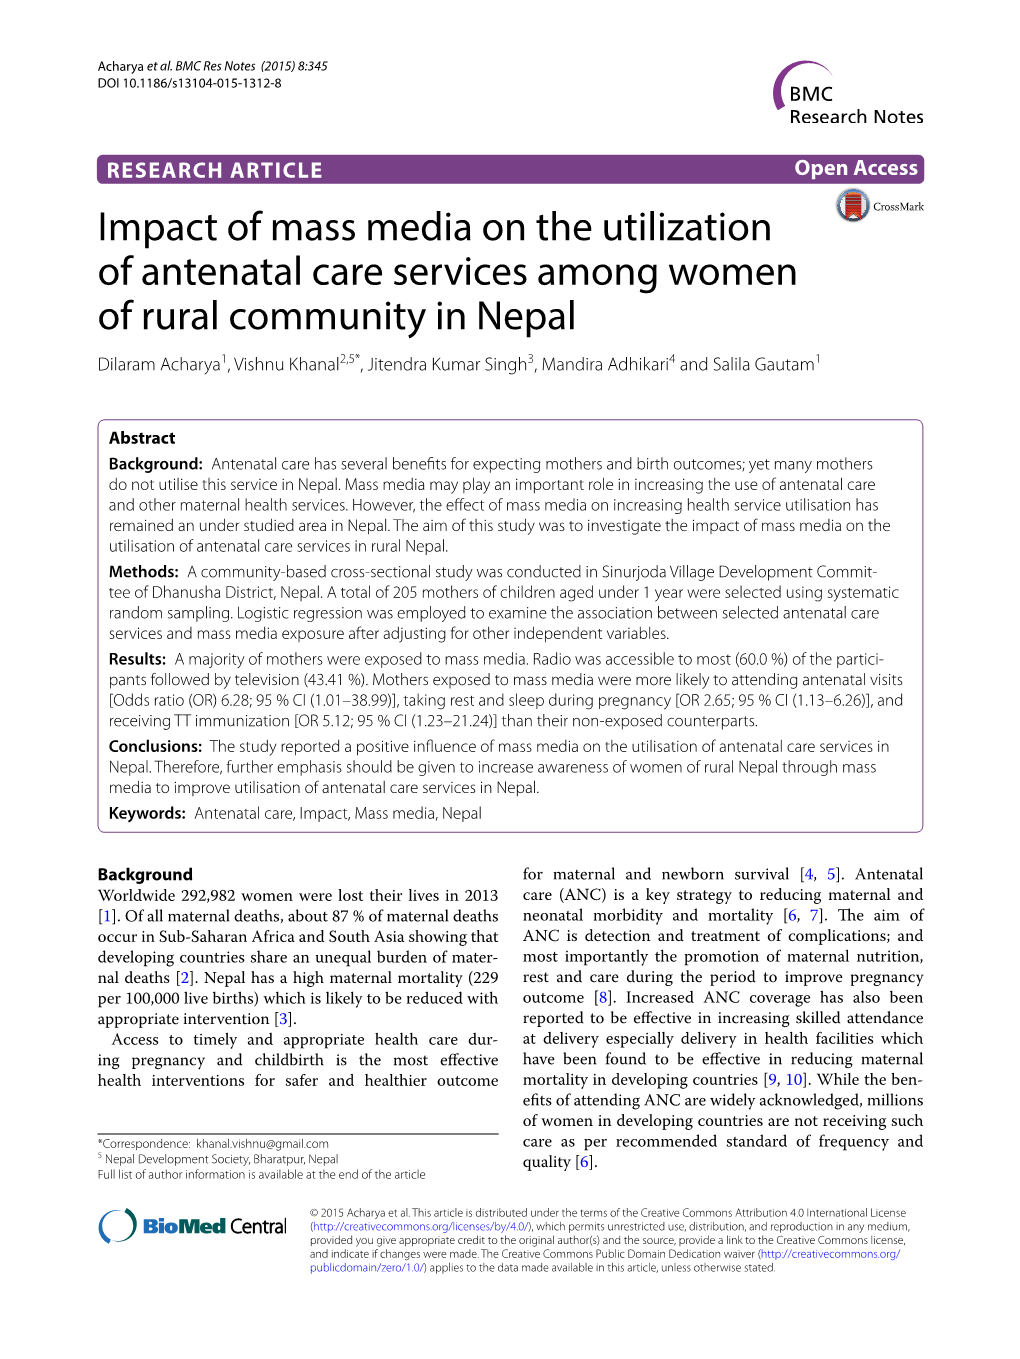 Impact of Mass Media on the Utilization of Antenatal Care Services